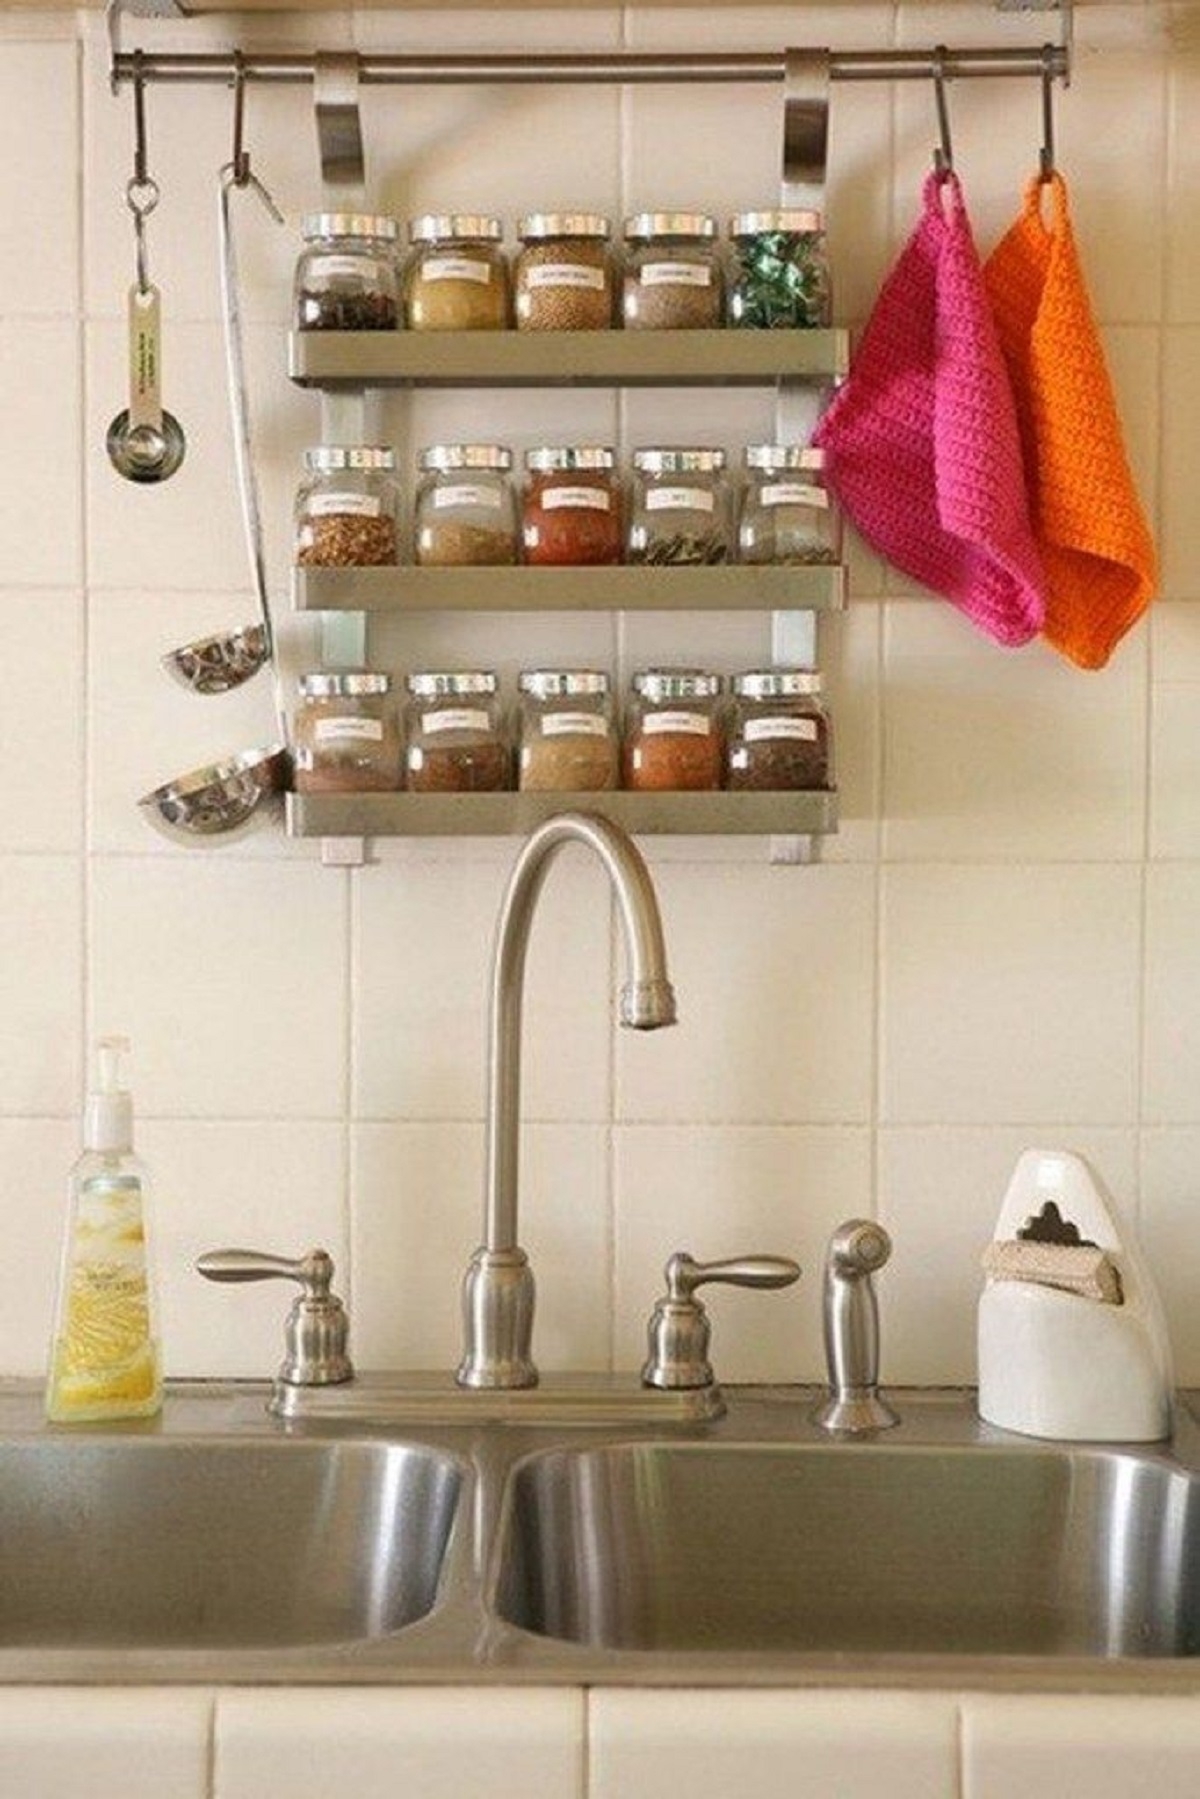 Wall or cabinet space consider hanging a spice holder over